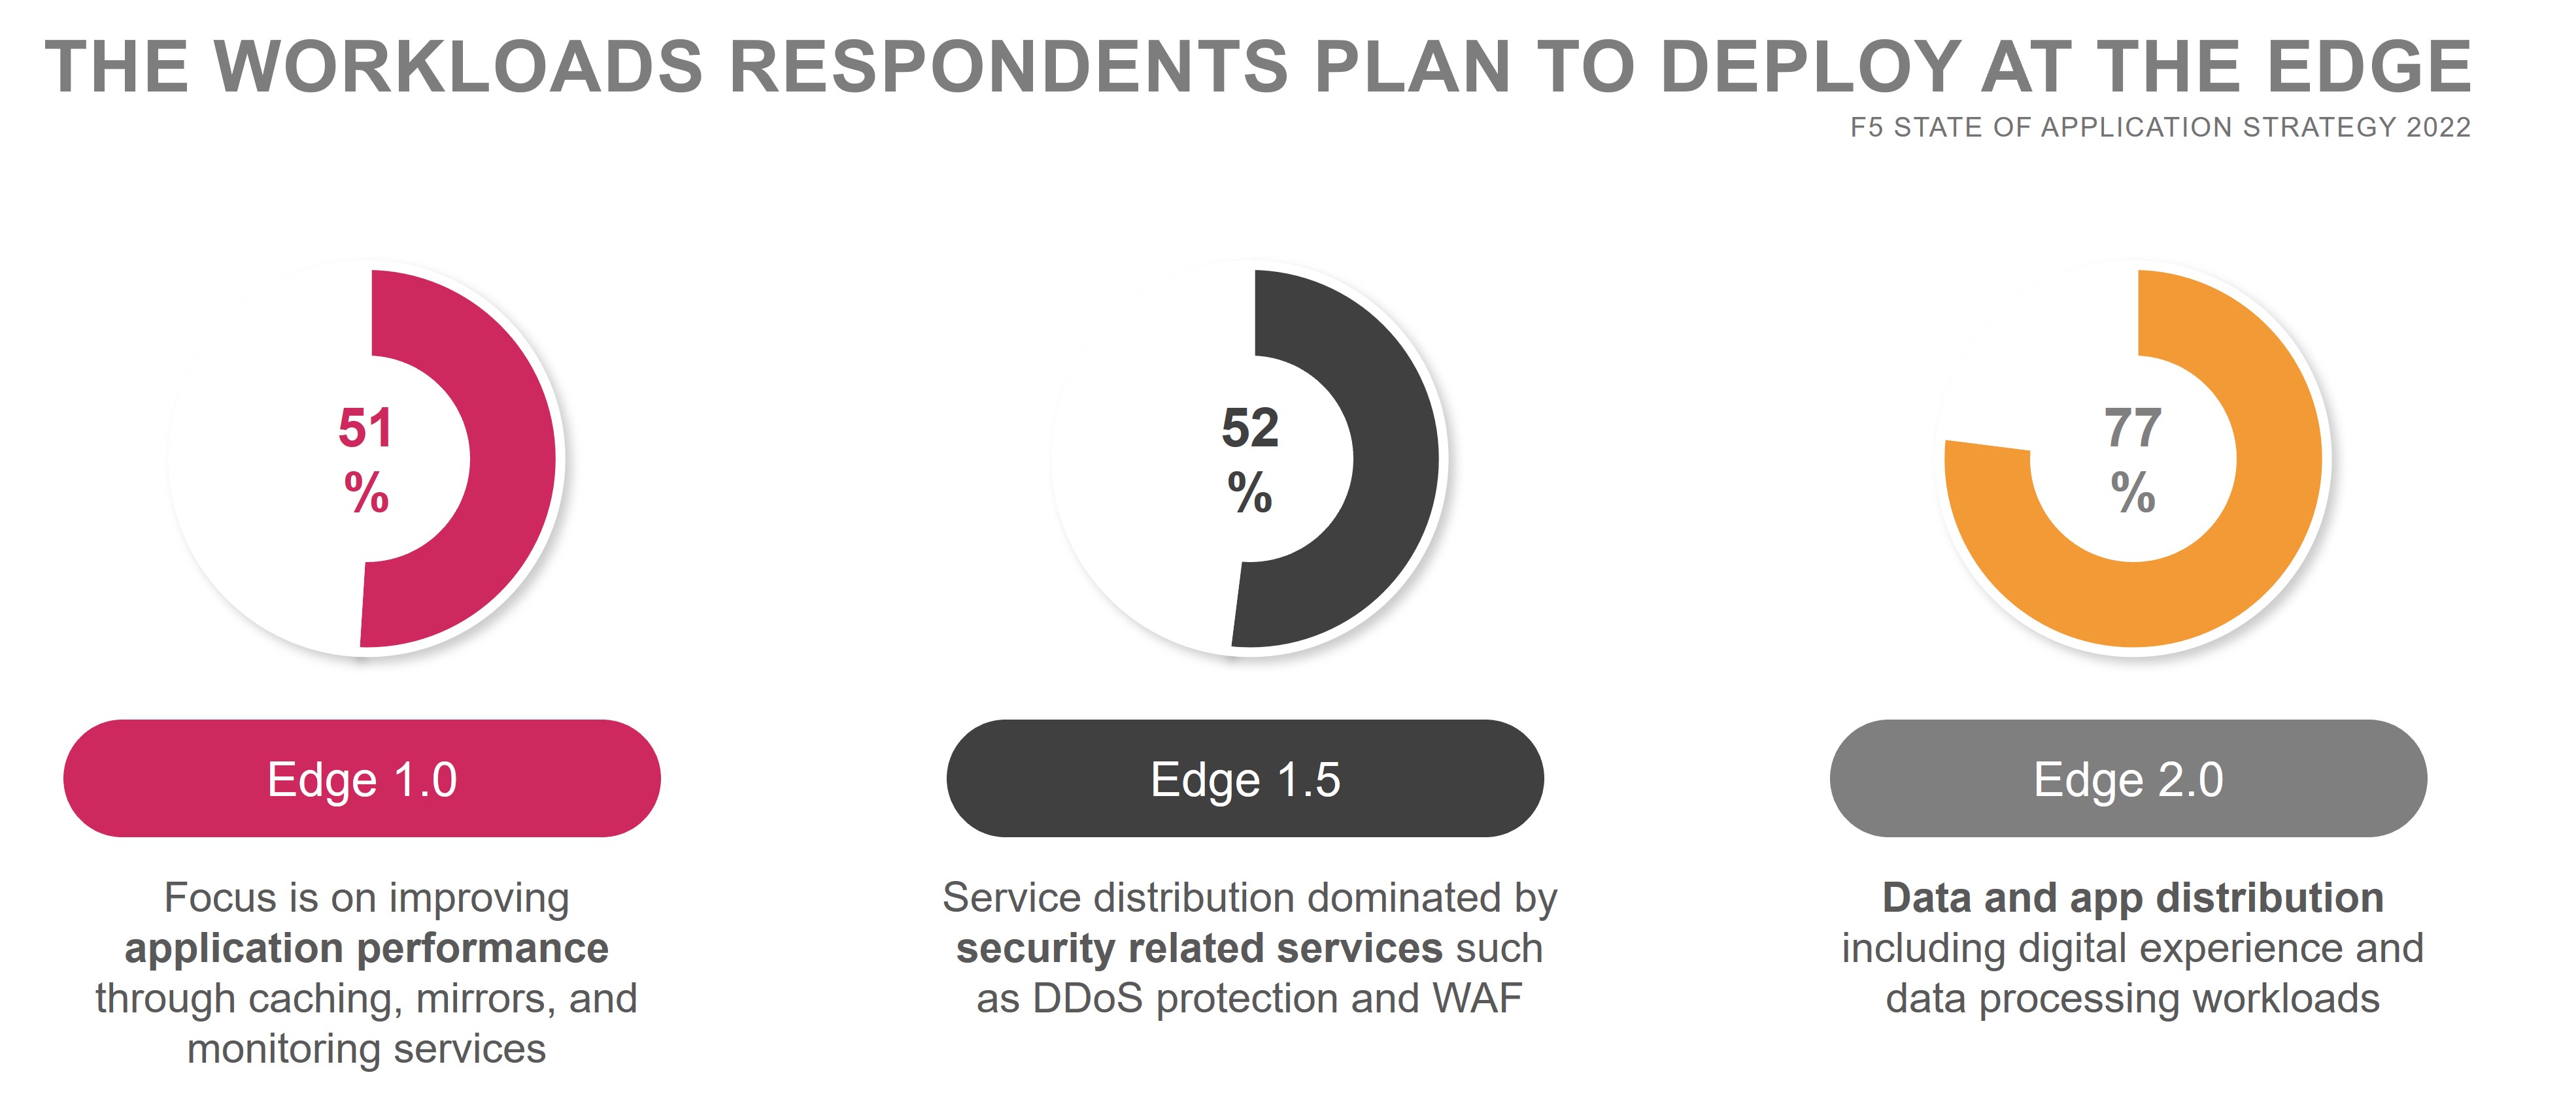 The workloads respondents plan to deploy at the edge